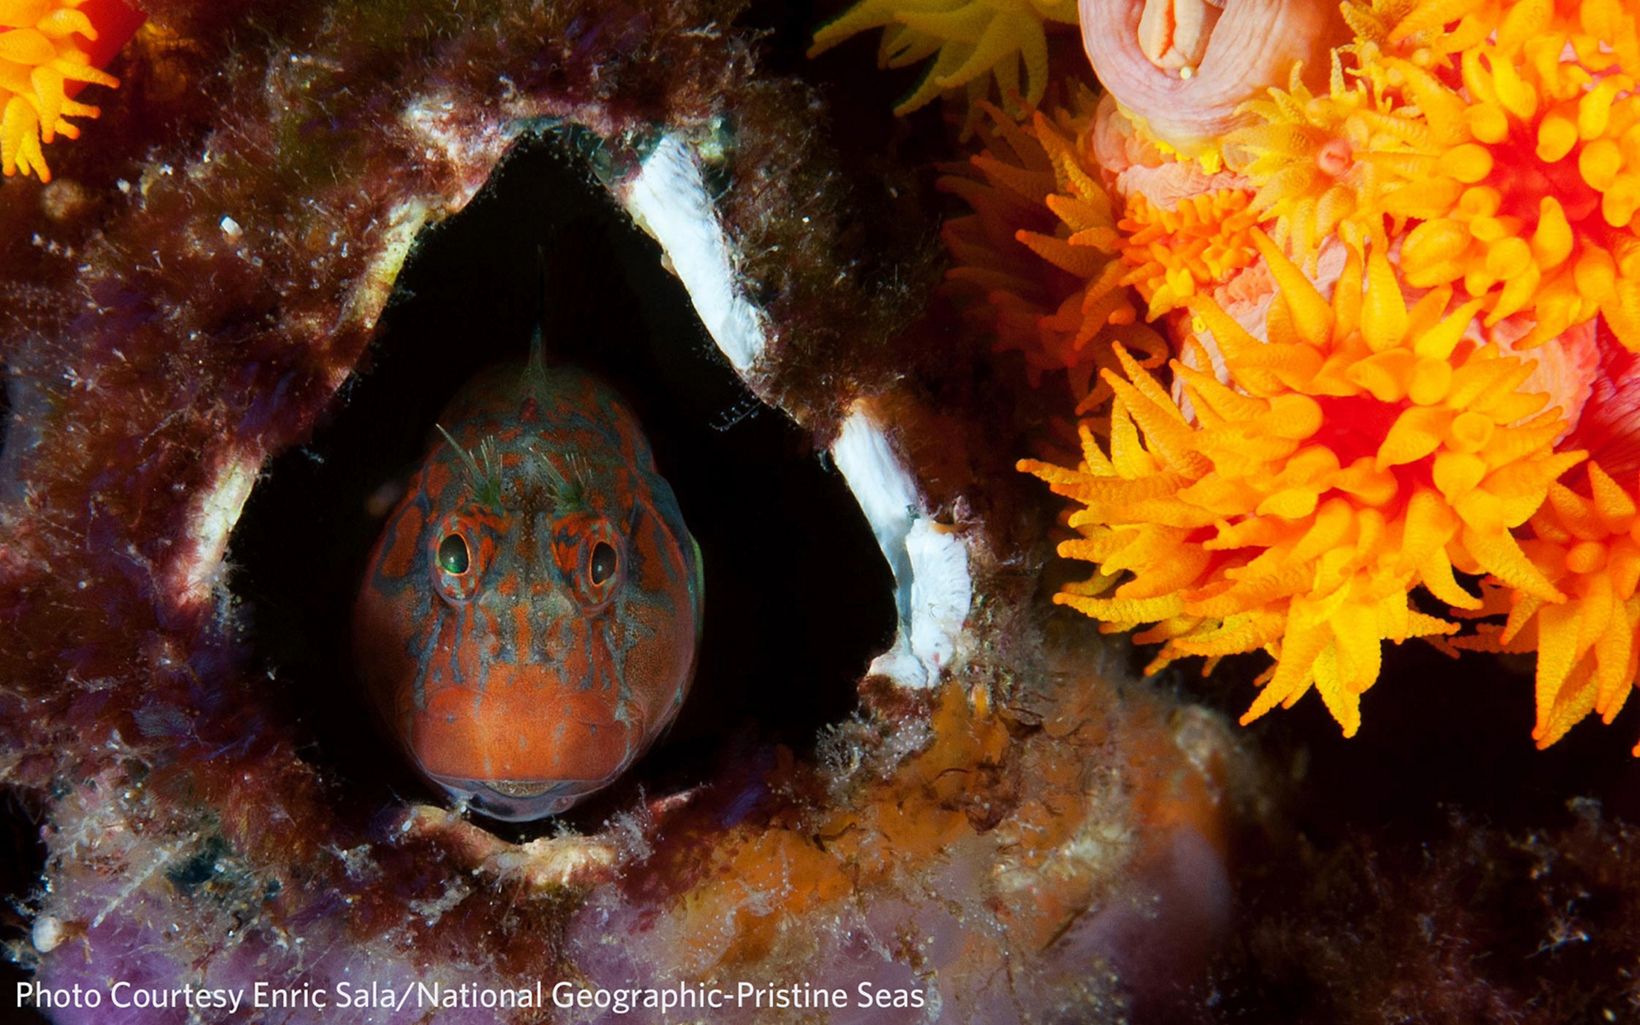 Combtooth Blenny A combtooth blenny peeks out from its tiny hiding place, having moved into the empty shell of a barnacle, off the coast of Gabon.  © Photo Courtesy Enric Sala/National Geographic-Pristine Seas.